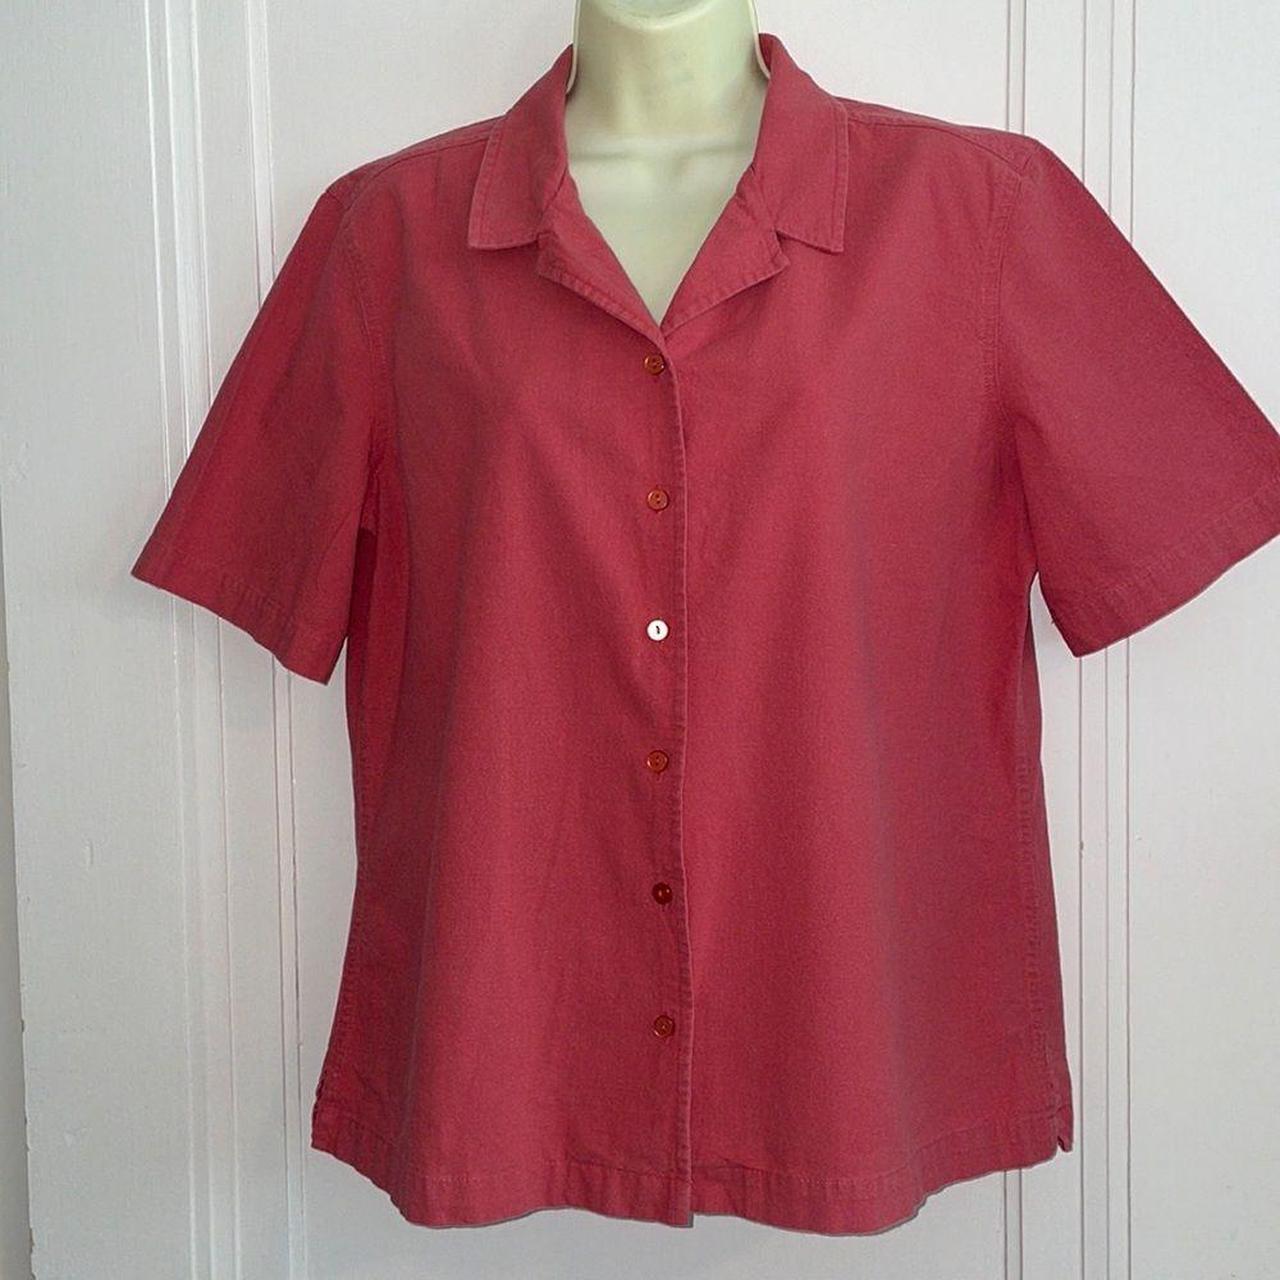 Vintage Talbots Womens Cotton Hot Pink Short Sleeve Button Down Blouse 